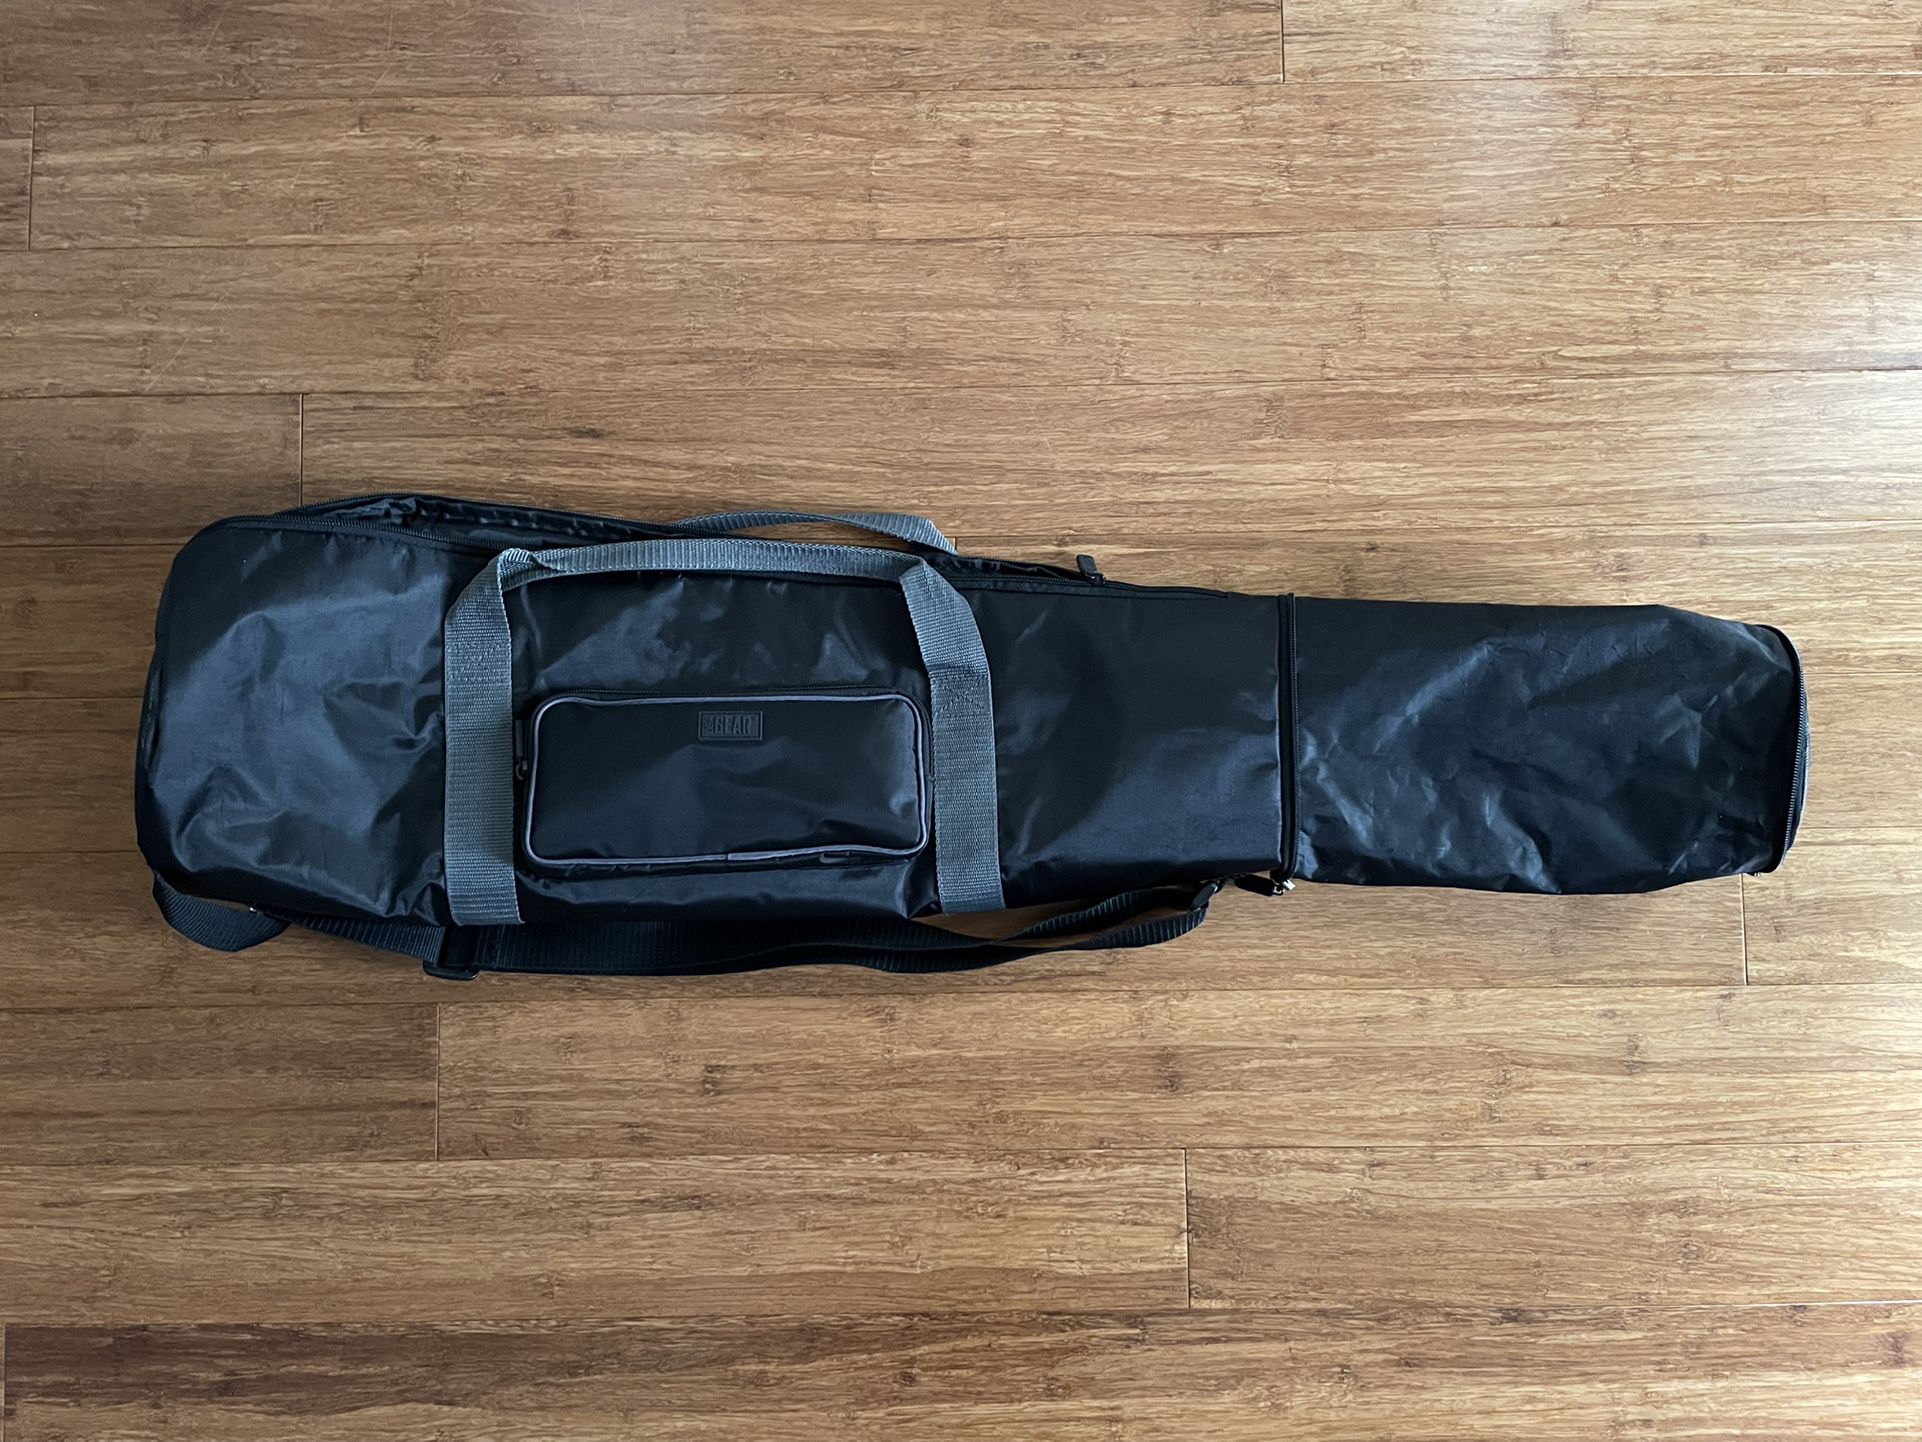 USA Gear Padded Tripod Case Bag - Holds Tripods from 21 to 35 inches